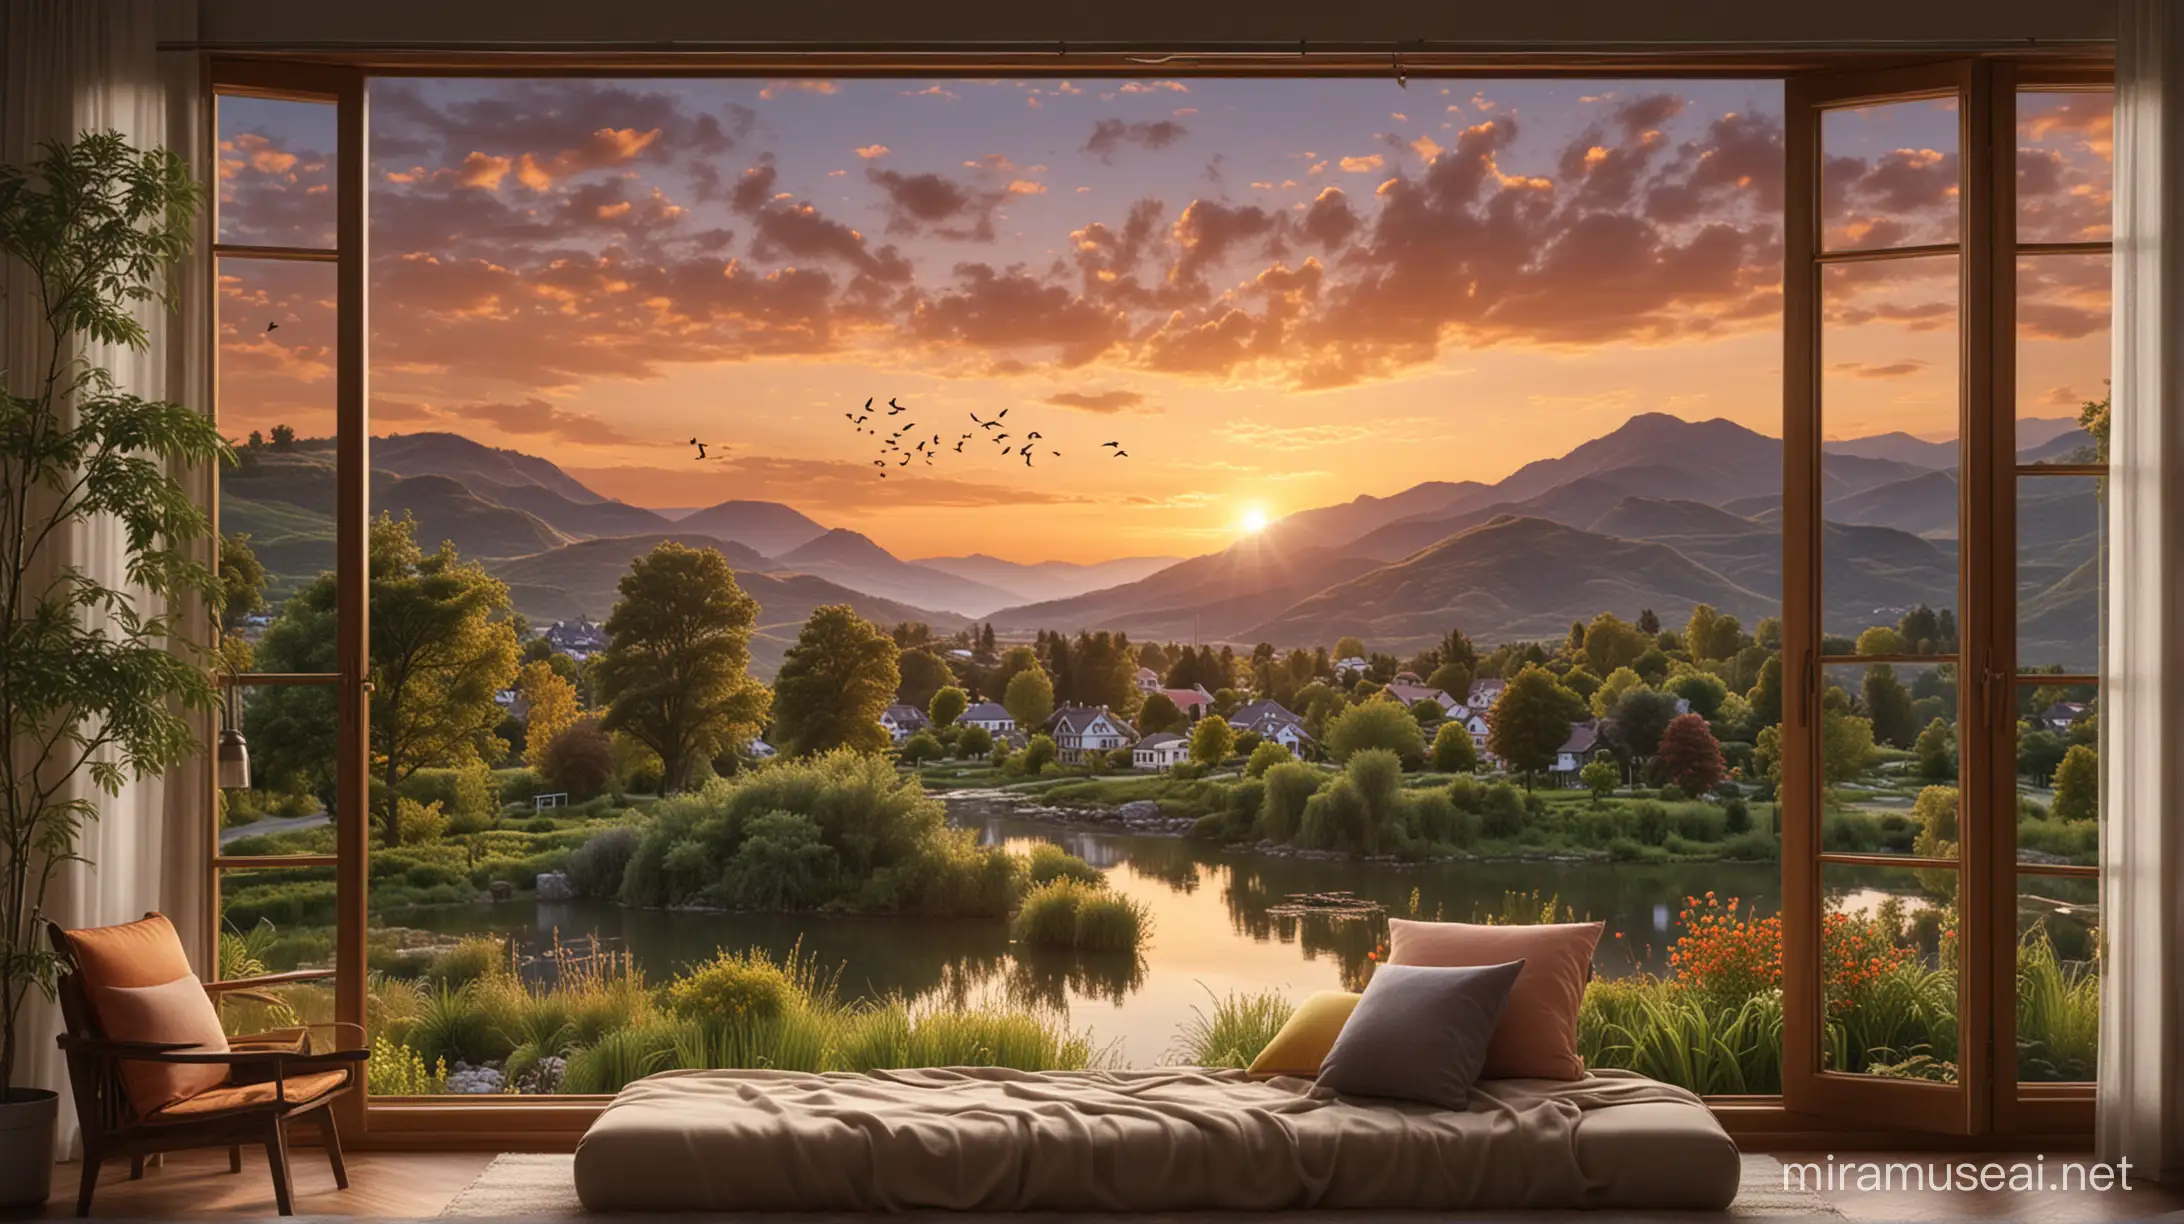 Sunset Vista with Majestic Mountains and Verdant Valley